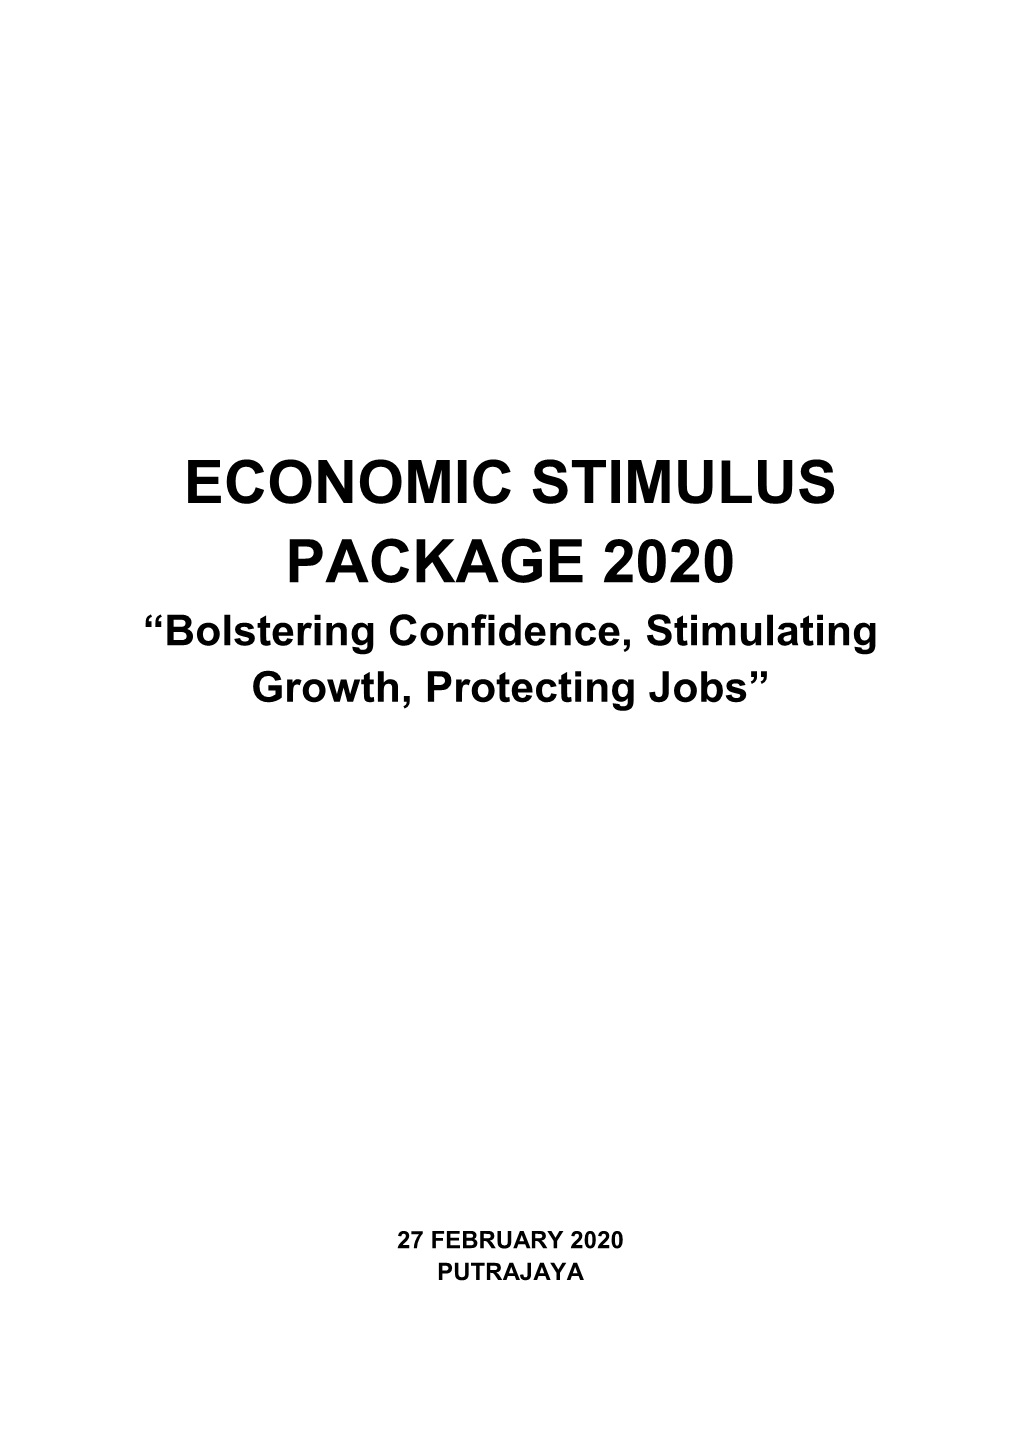 ECONOMIC STIMULUS PACKAGE 2020 “Bolstering Confidence, Stimulating Growth, Protecting Jobs”